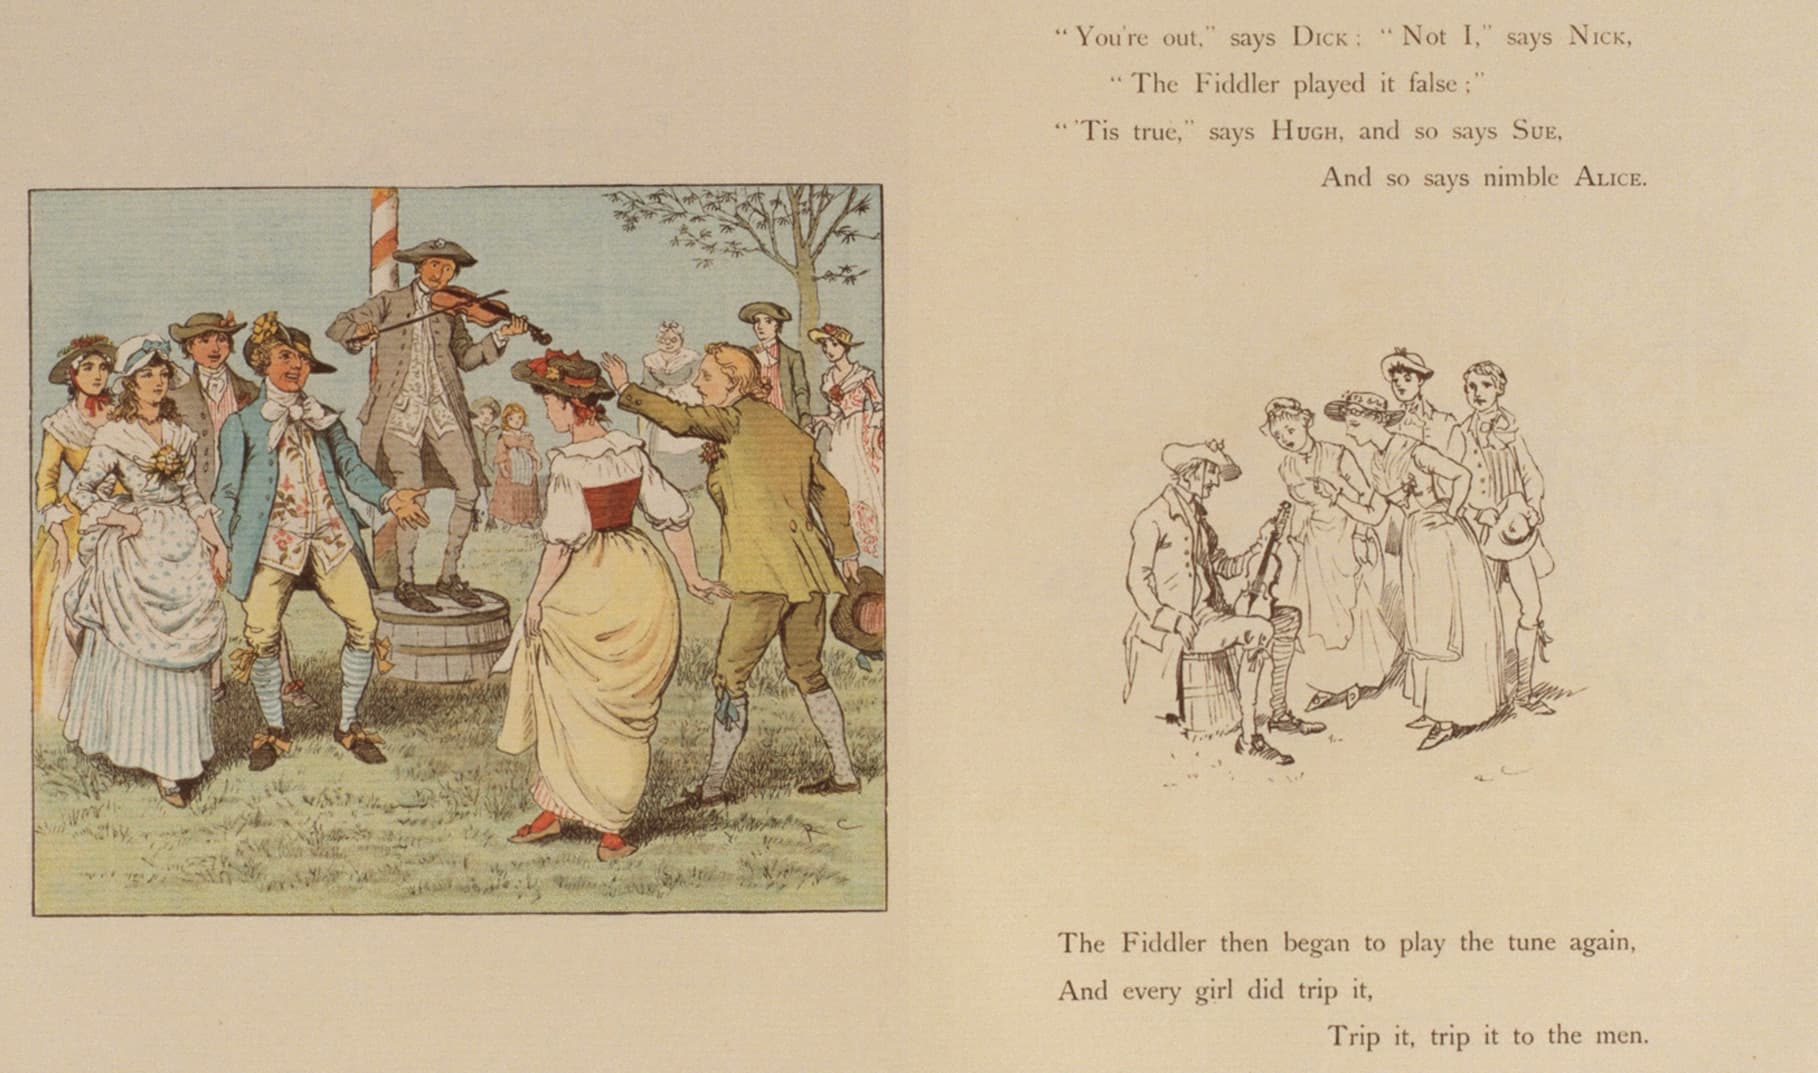 page 10-11 of Come Lasses and Lads (page 408-409 of The Complete Collection of PICTURES and SONGS)